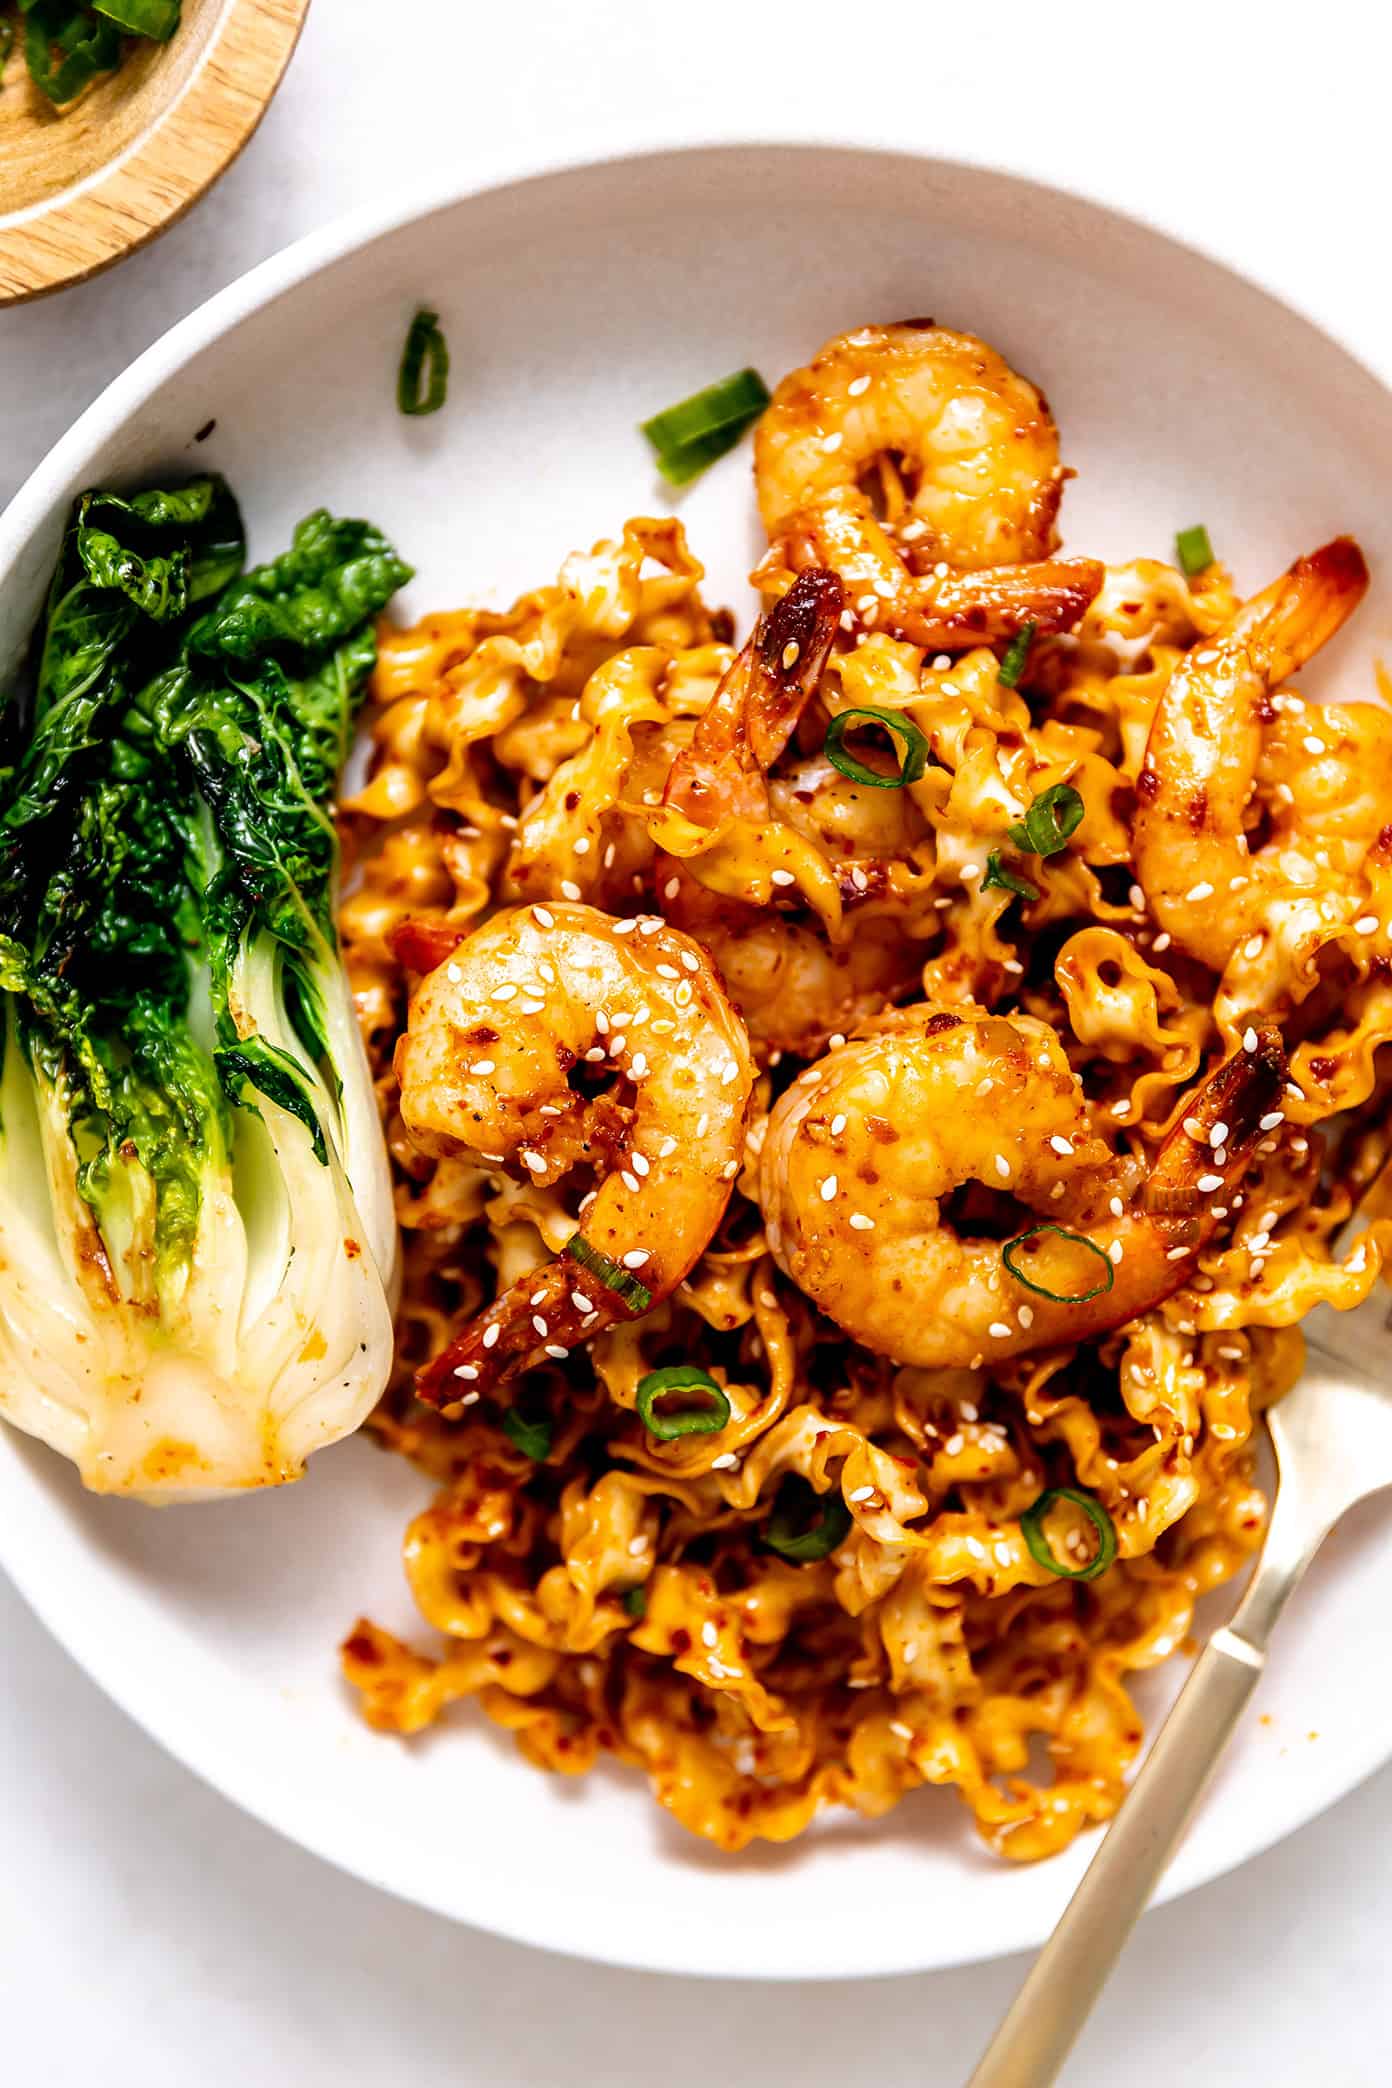 Garlic Chili Oil Noodles with Shrimp and Bok Choy on Plate